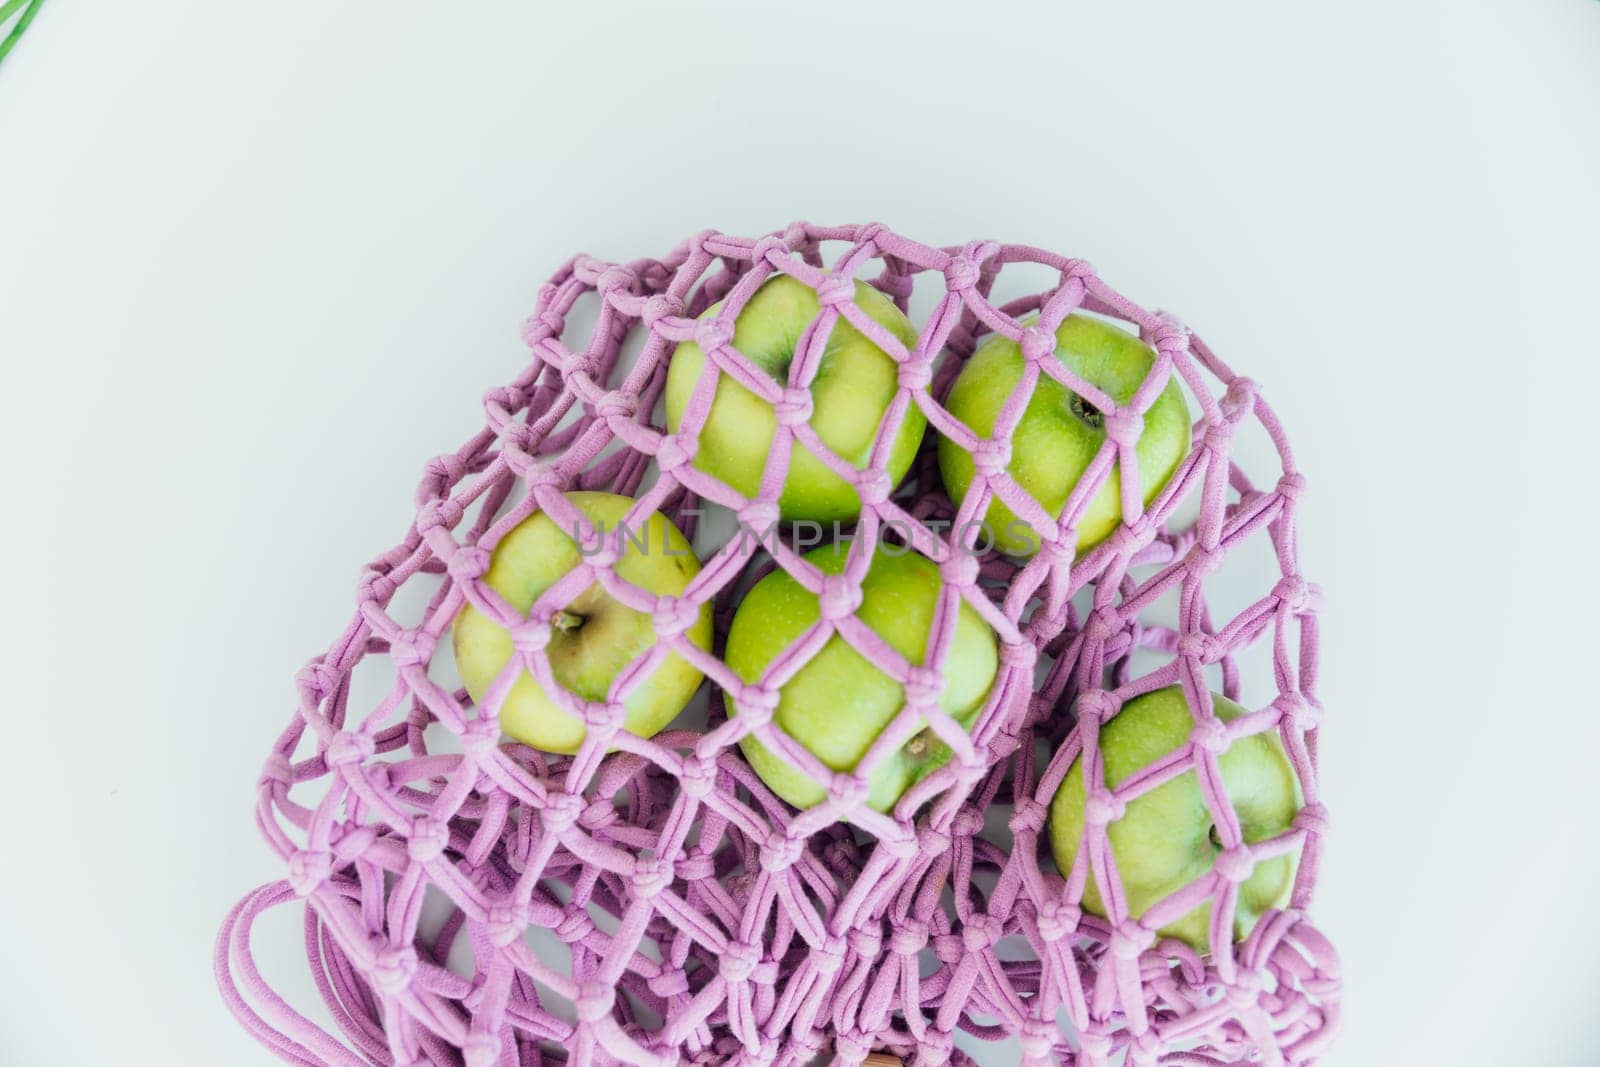 Five green apples in a mesh bag on a white background